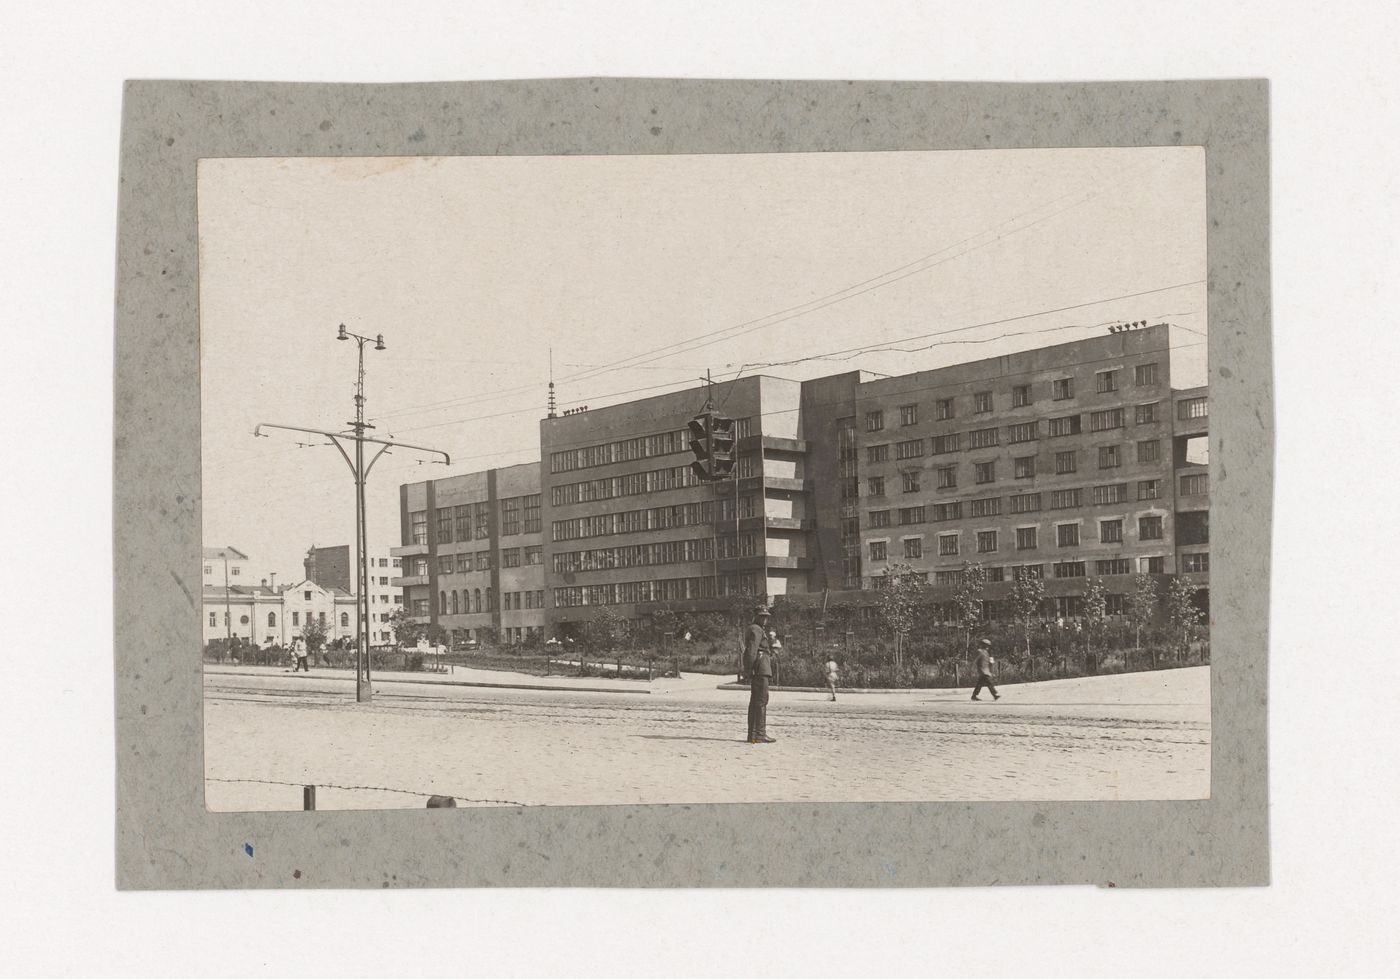 View of the Ural All-Union Communist Party of Bolsheviks and District Executive Committee Building from across the street, 1905 Goda Square, Sverdlovsk, Soviet Union (now Ekaterinburg, Russia)